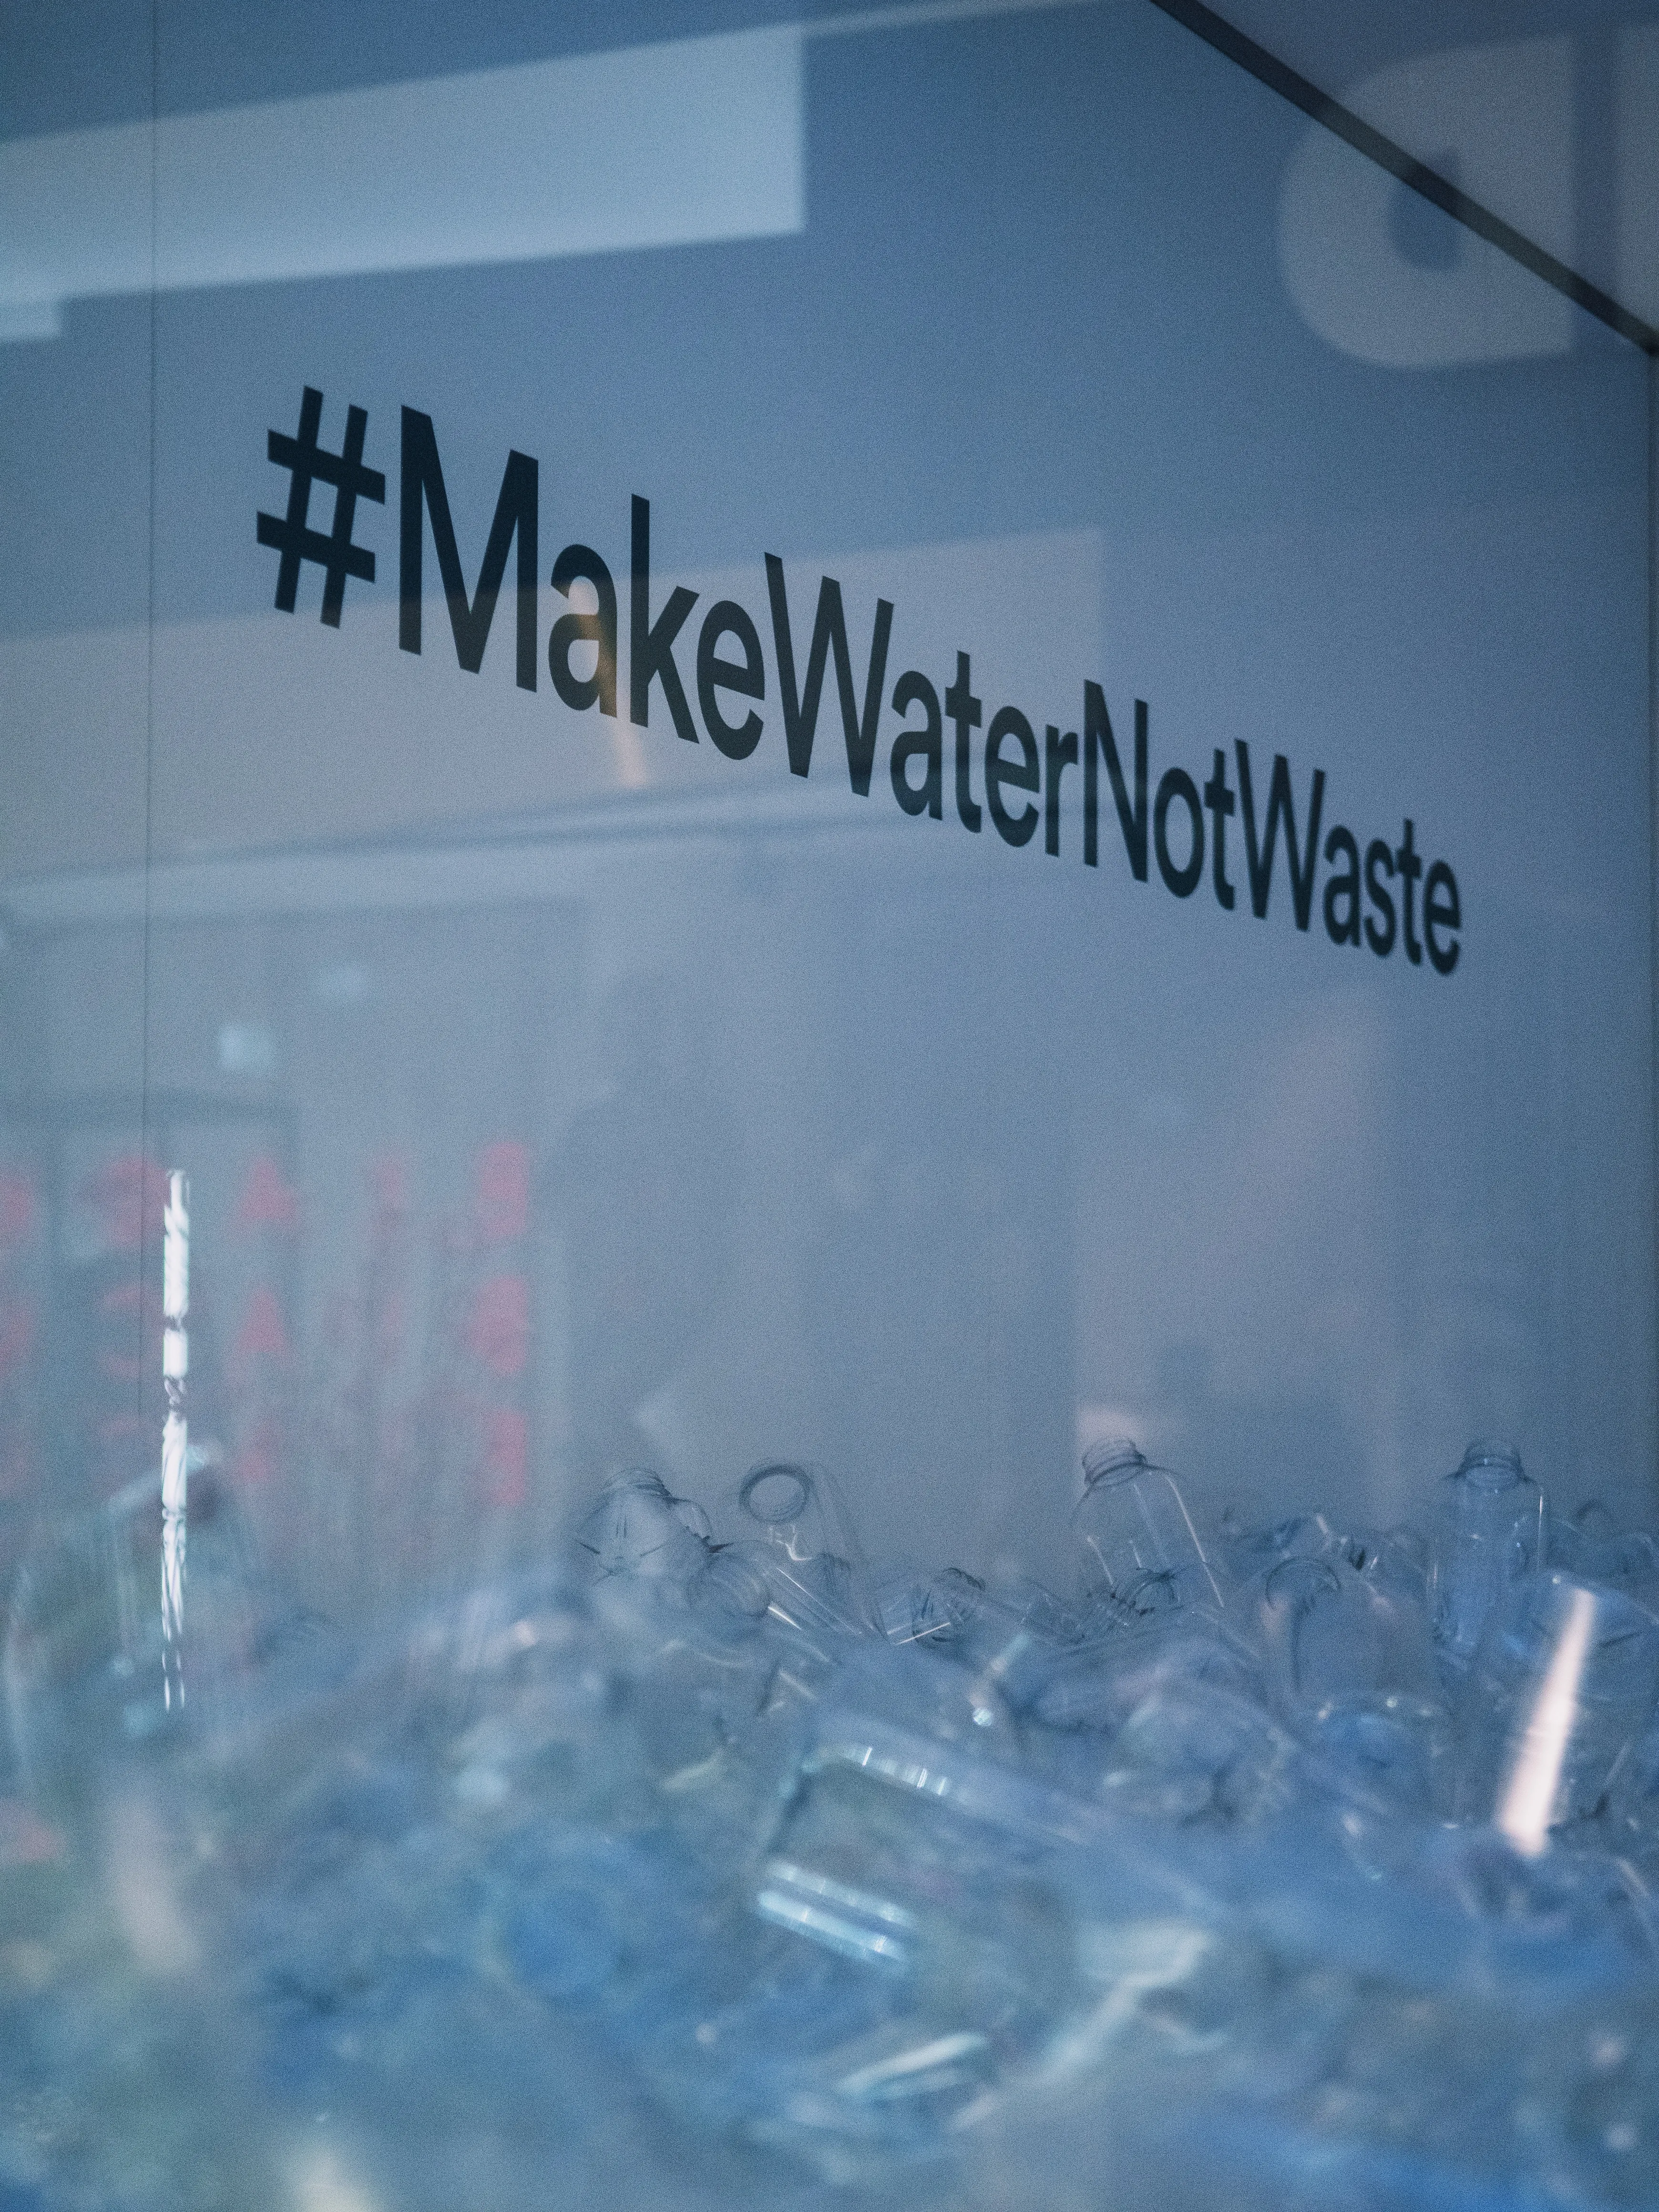 An ad for the Mitte water purifier stating "#makewaternotwaste"